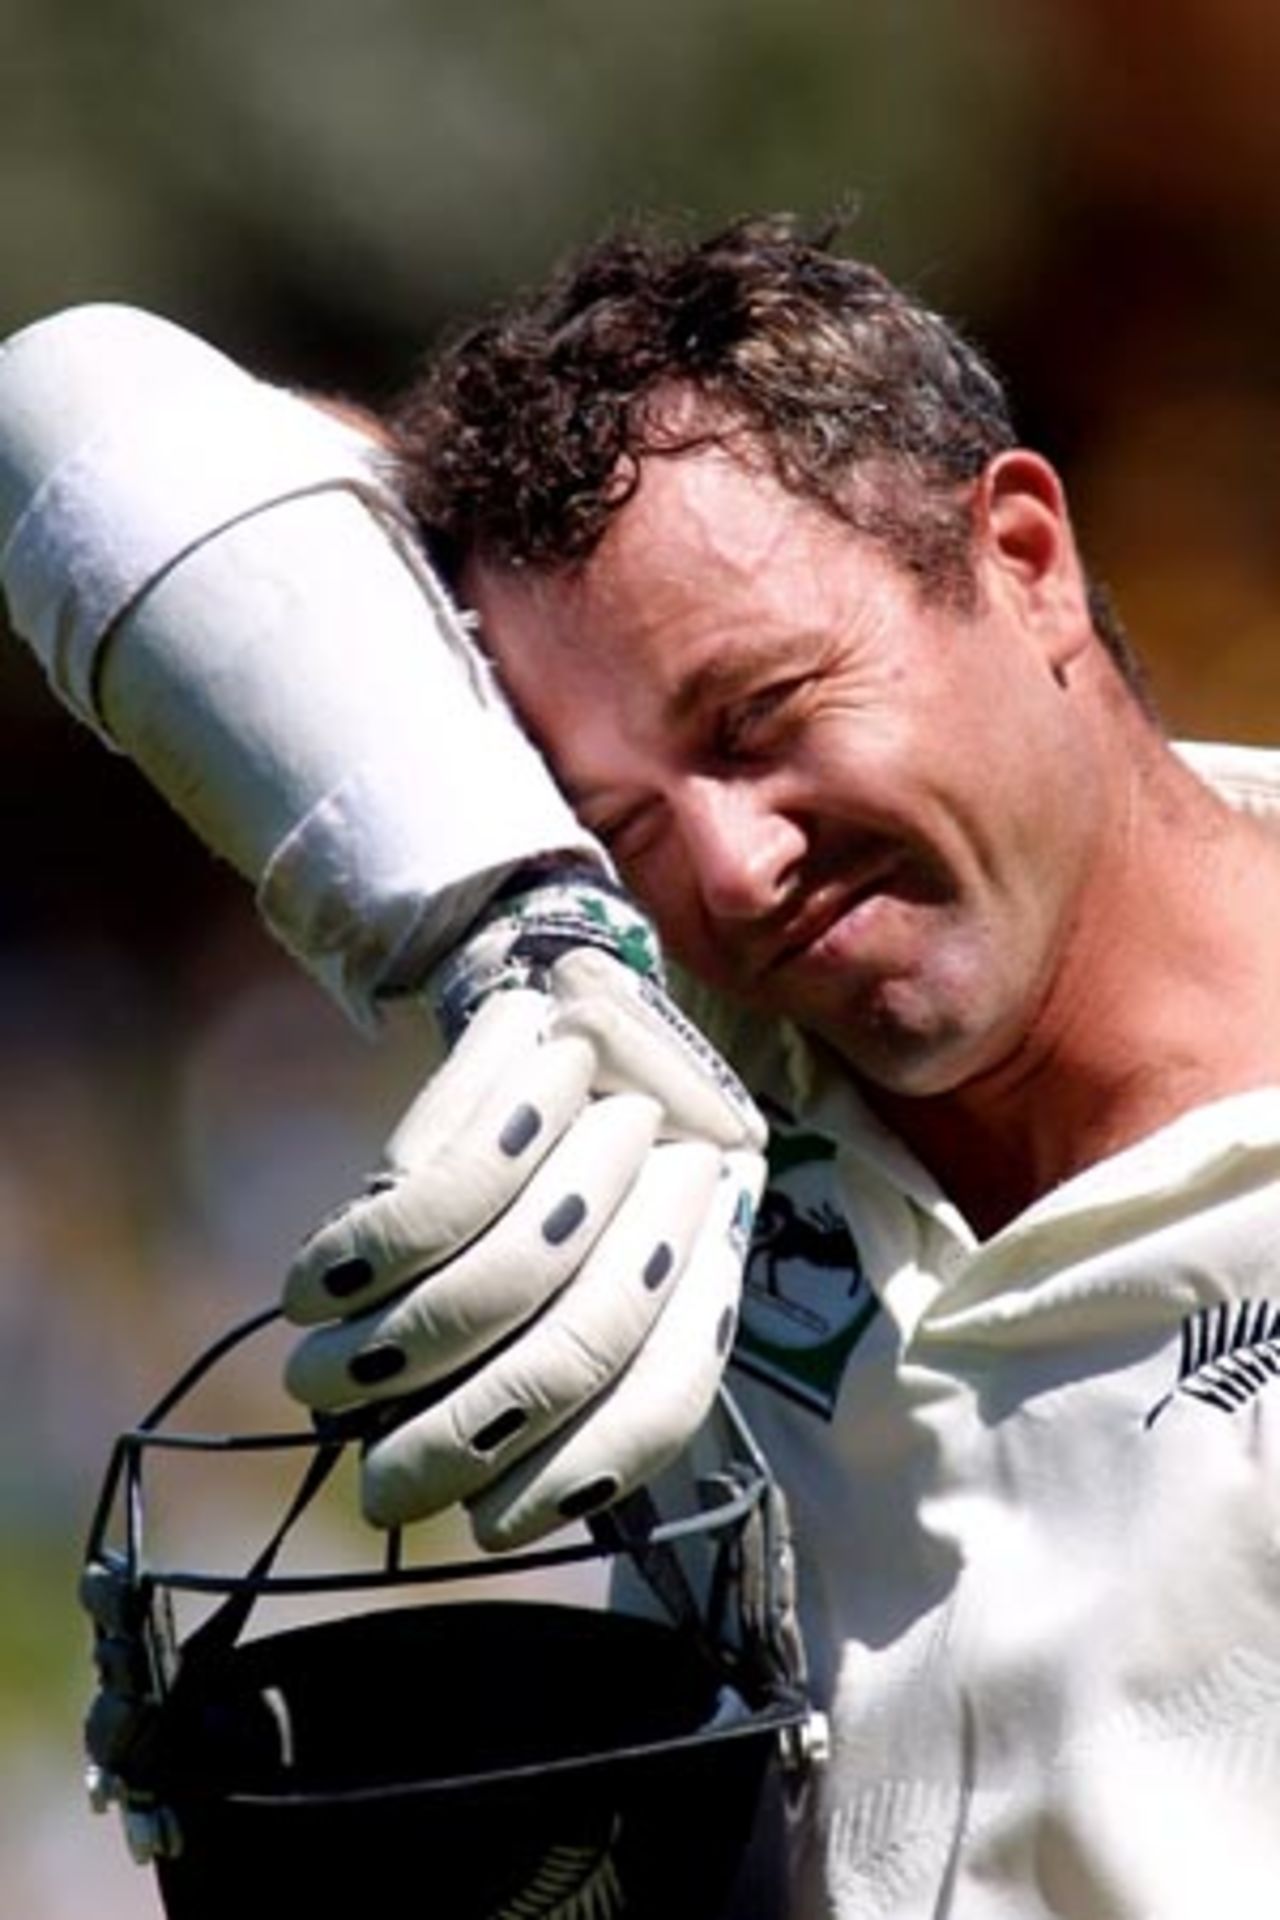 New Zealand batsman Mark Richardson wipes sweat from his forehead after being dismissed for 83, caught by Bangladesh fielder Mashrafe Mortaza from the bowling of Hasibul Hossain. 2nd Test: New Zealand v Bangladesh at Basin Reserve, Wellington, 26-30 Dec 2001 (29 December 2001).